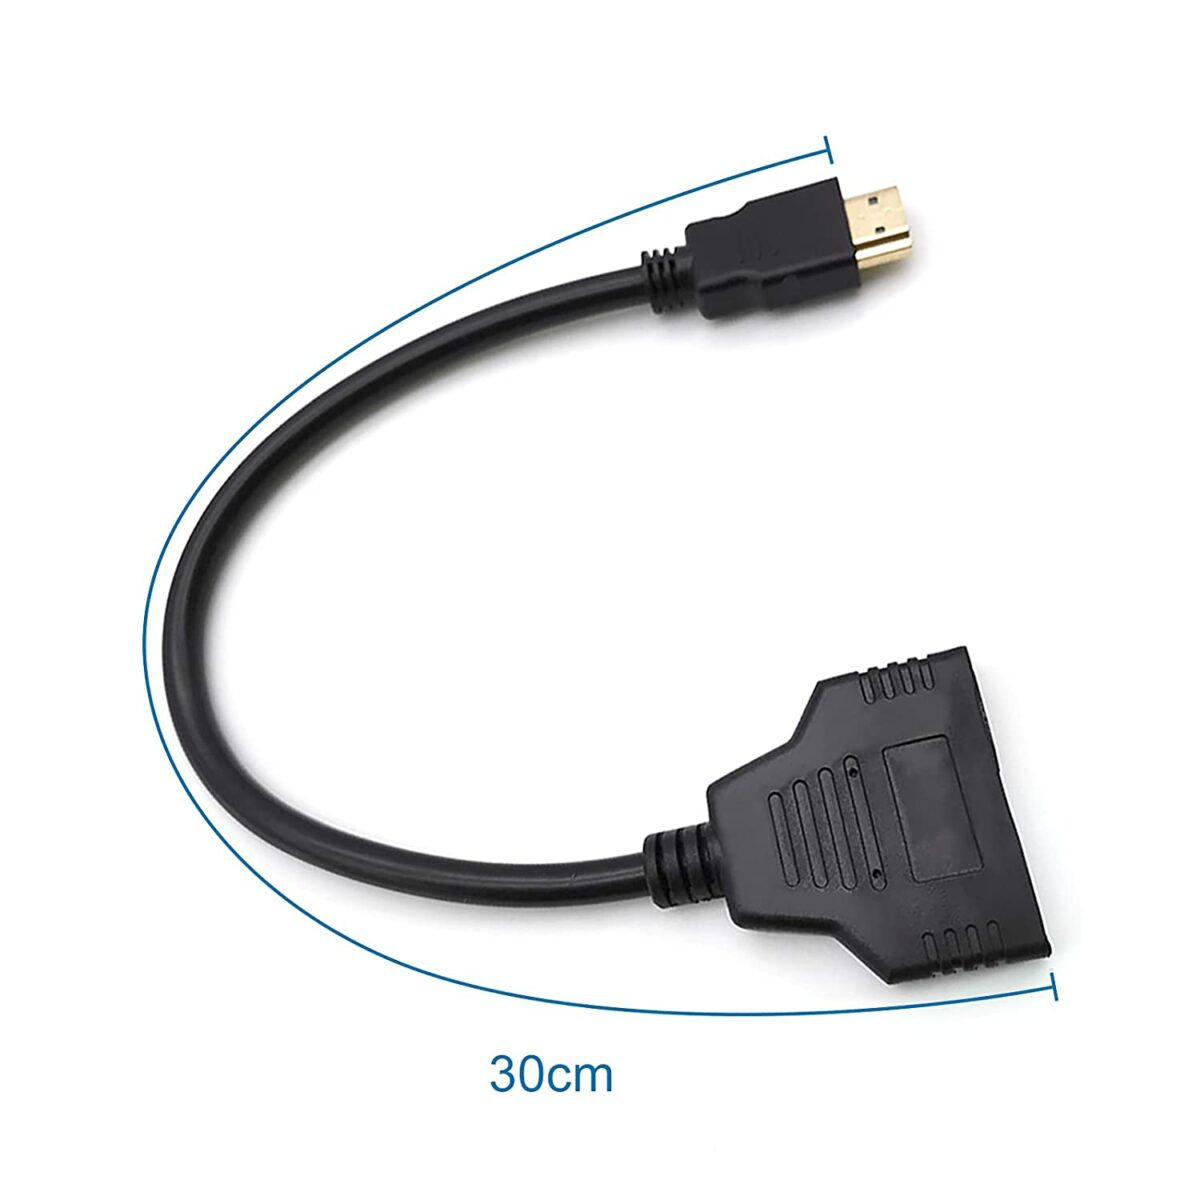 HDMI Splitter Adapter Cable (1 in HDMI Male to 2 Out HDMI Female)